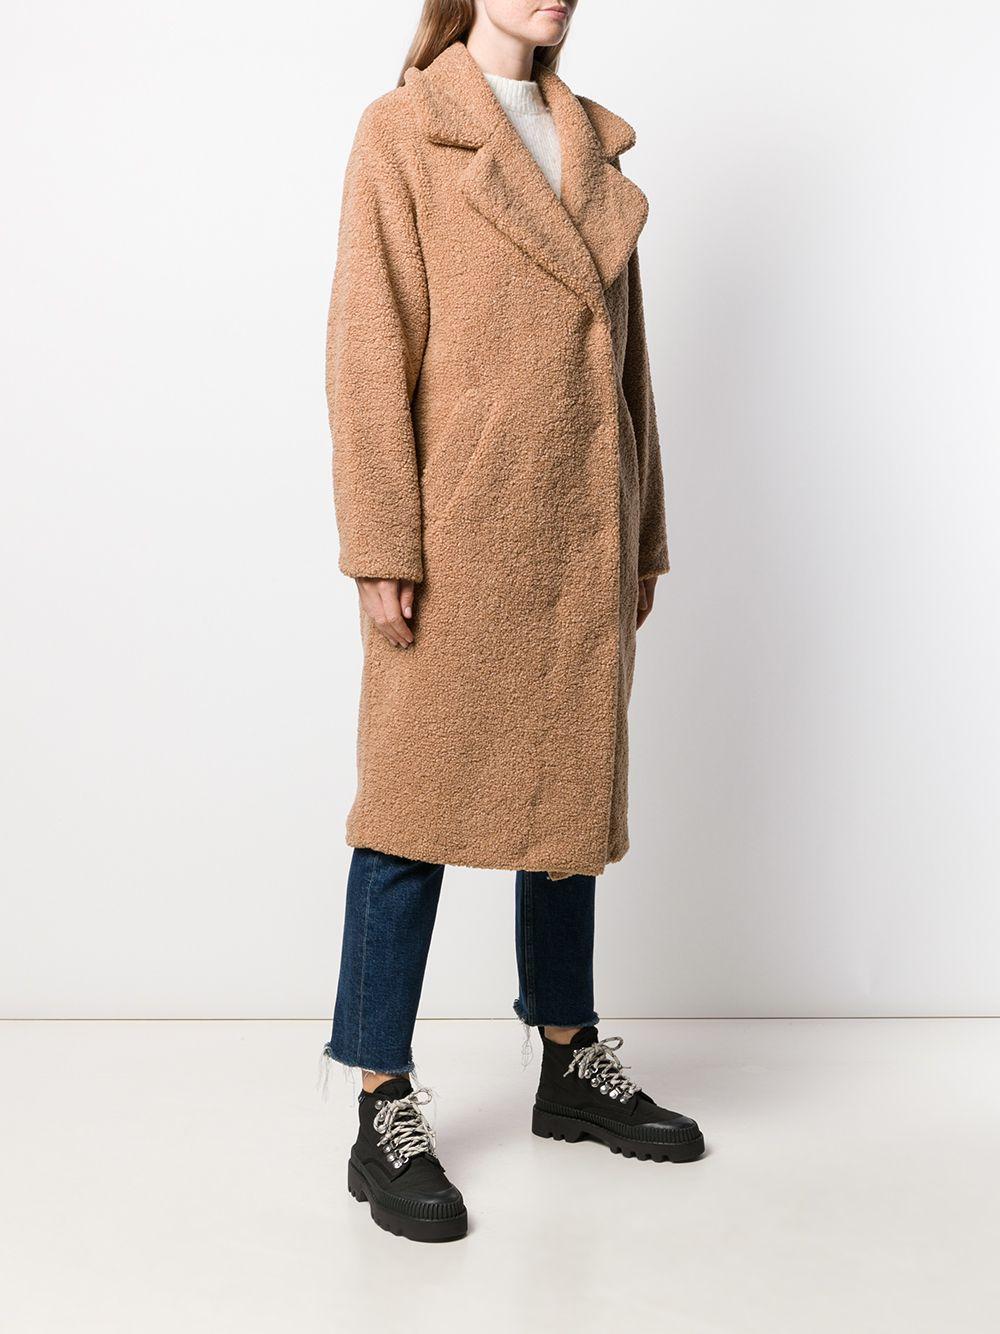 UGG Oversized Shearling Coat in Brown - Lyst